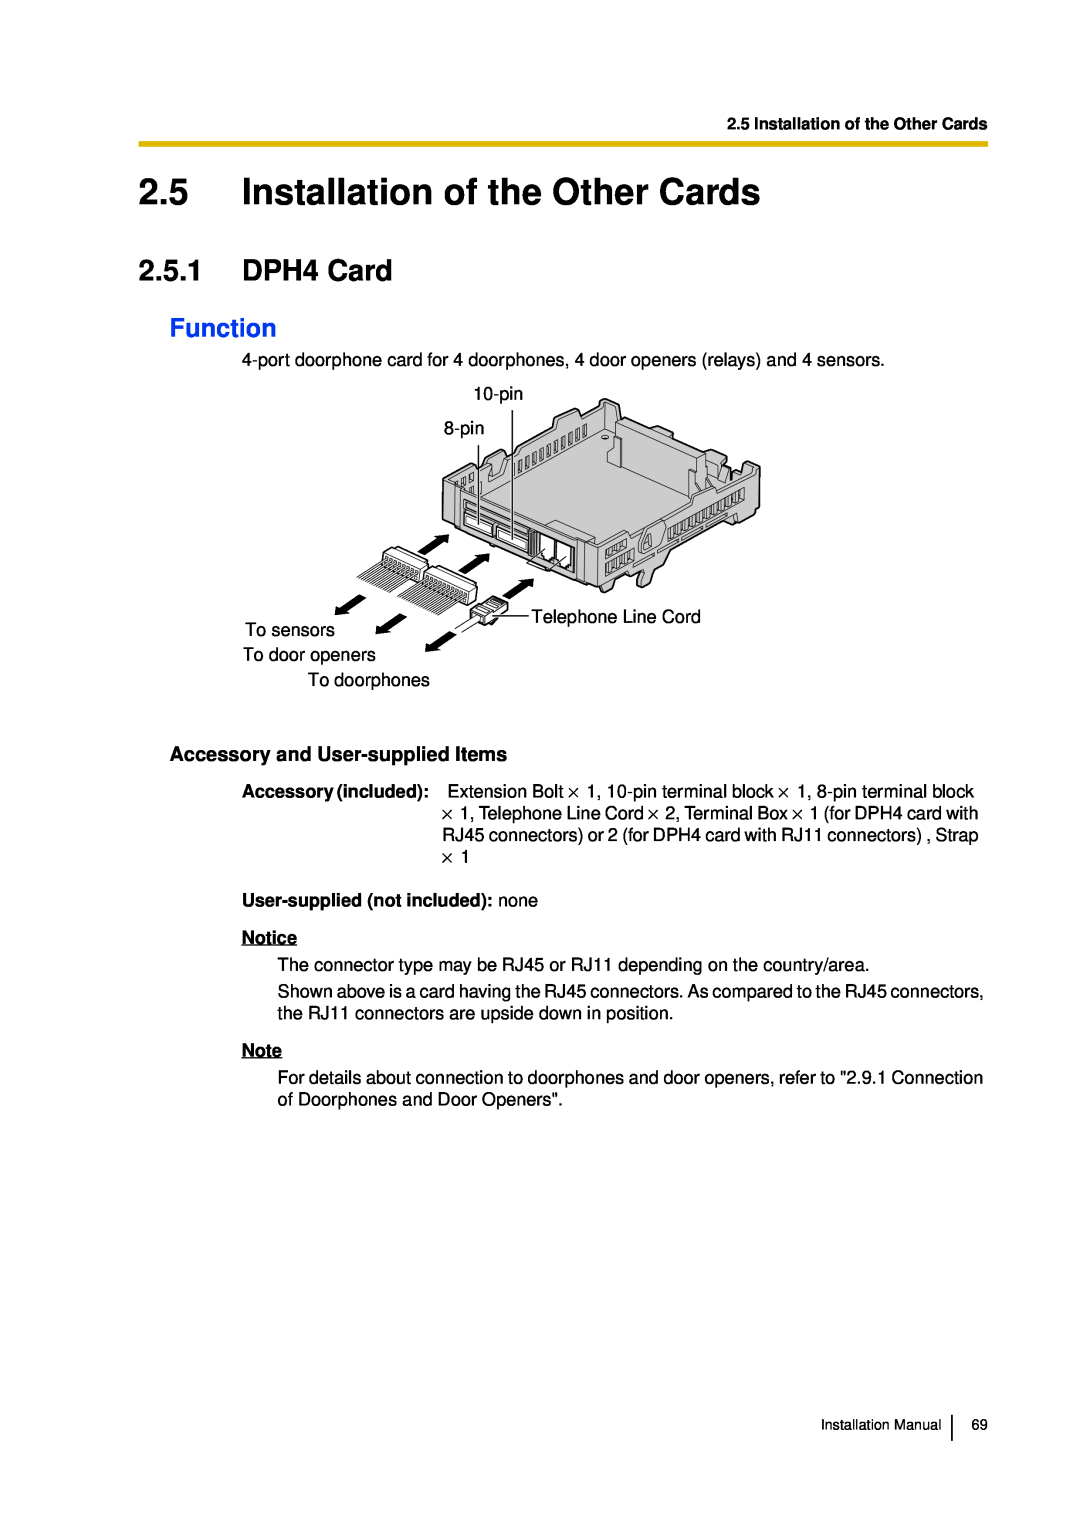 Panasonic KX-TDA30 2.5Installation of the Other Cards, 2.5.1DPH4 Card, Function, User-suppliednot included: none Notice 